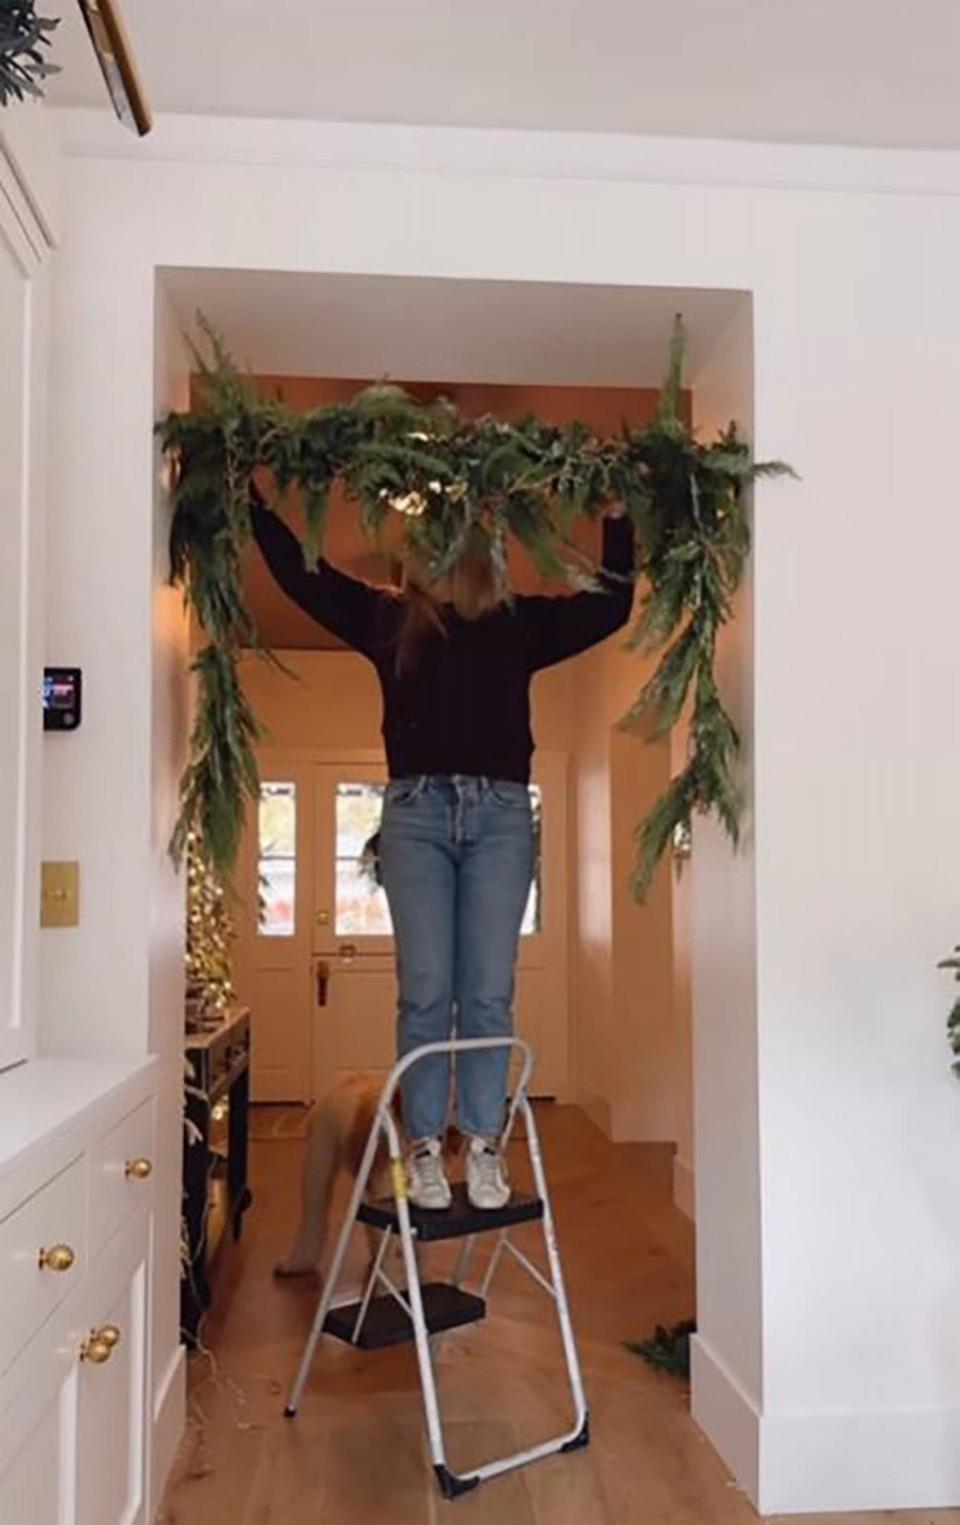 PHOTO: Ashley Stringfellow, founder of Modern Glam, tried the viral garland shower rod hack. (@modernglamhome/Instagram)